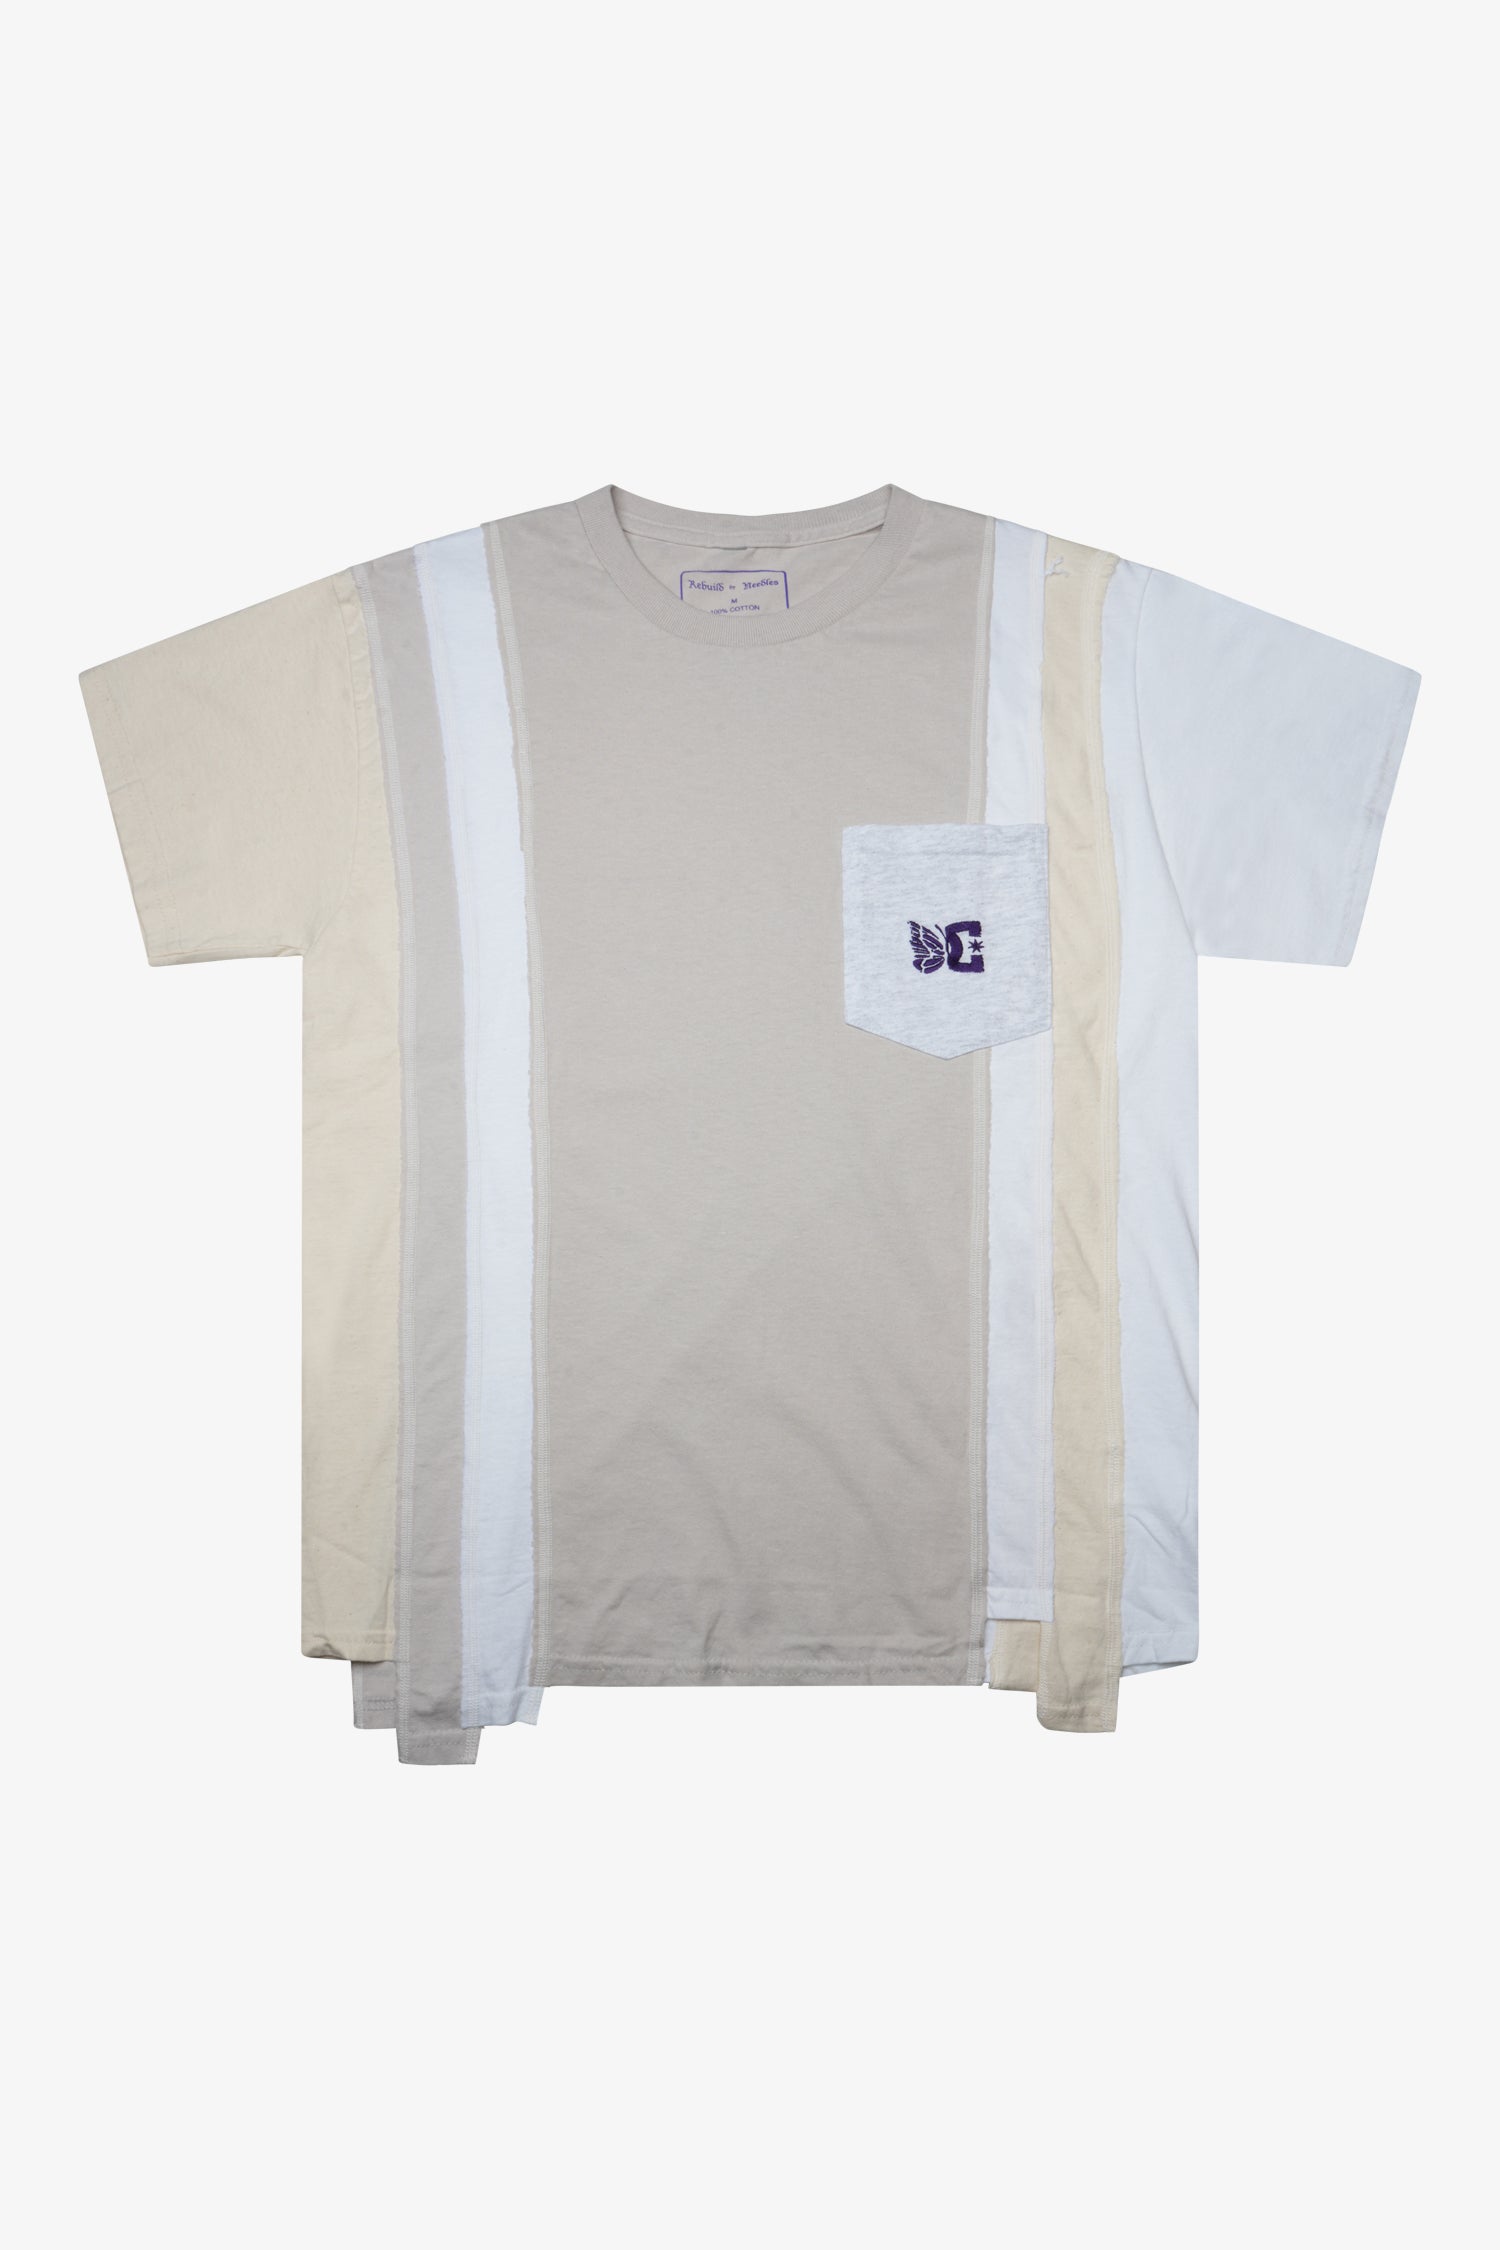 DC Shoes 7 Cuts Tee-FRAME